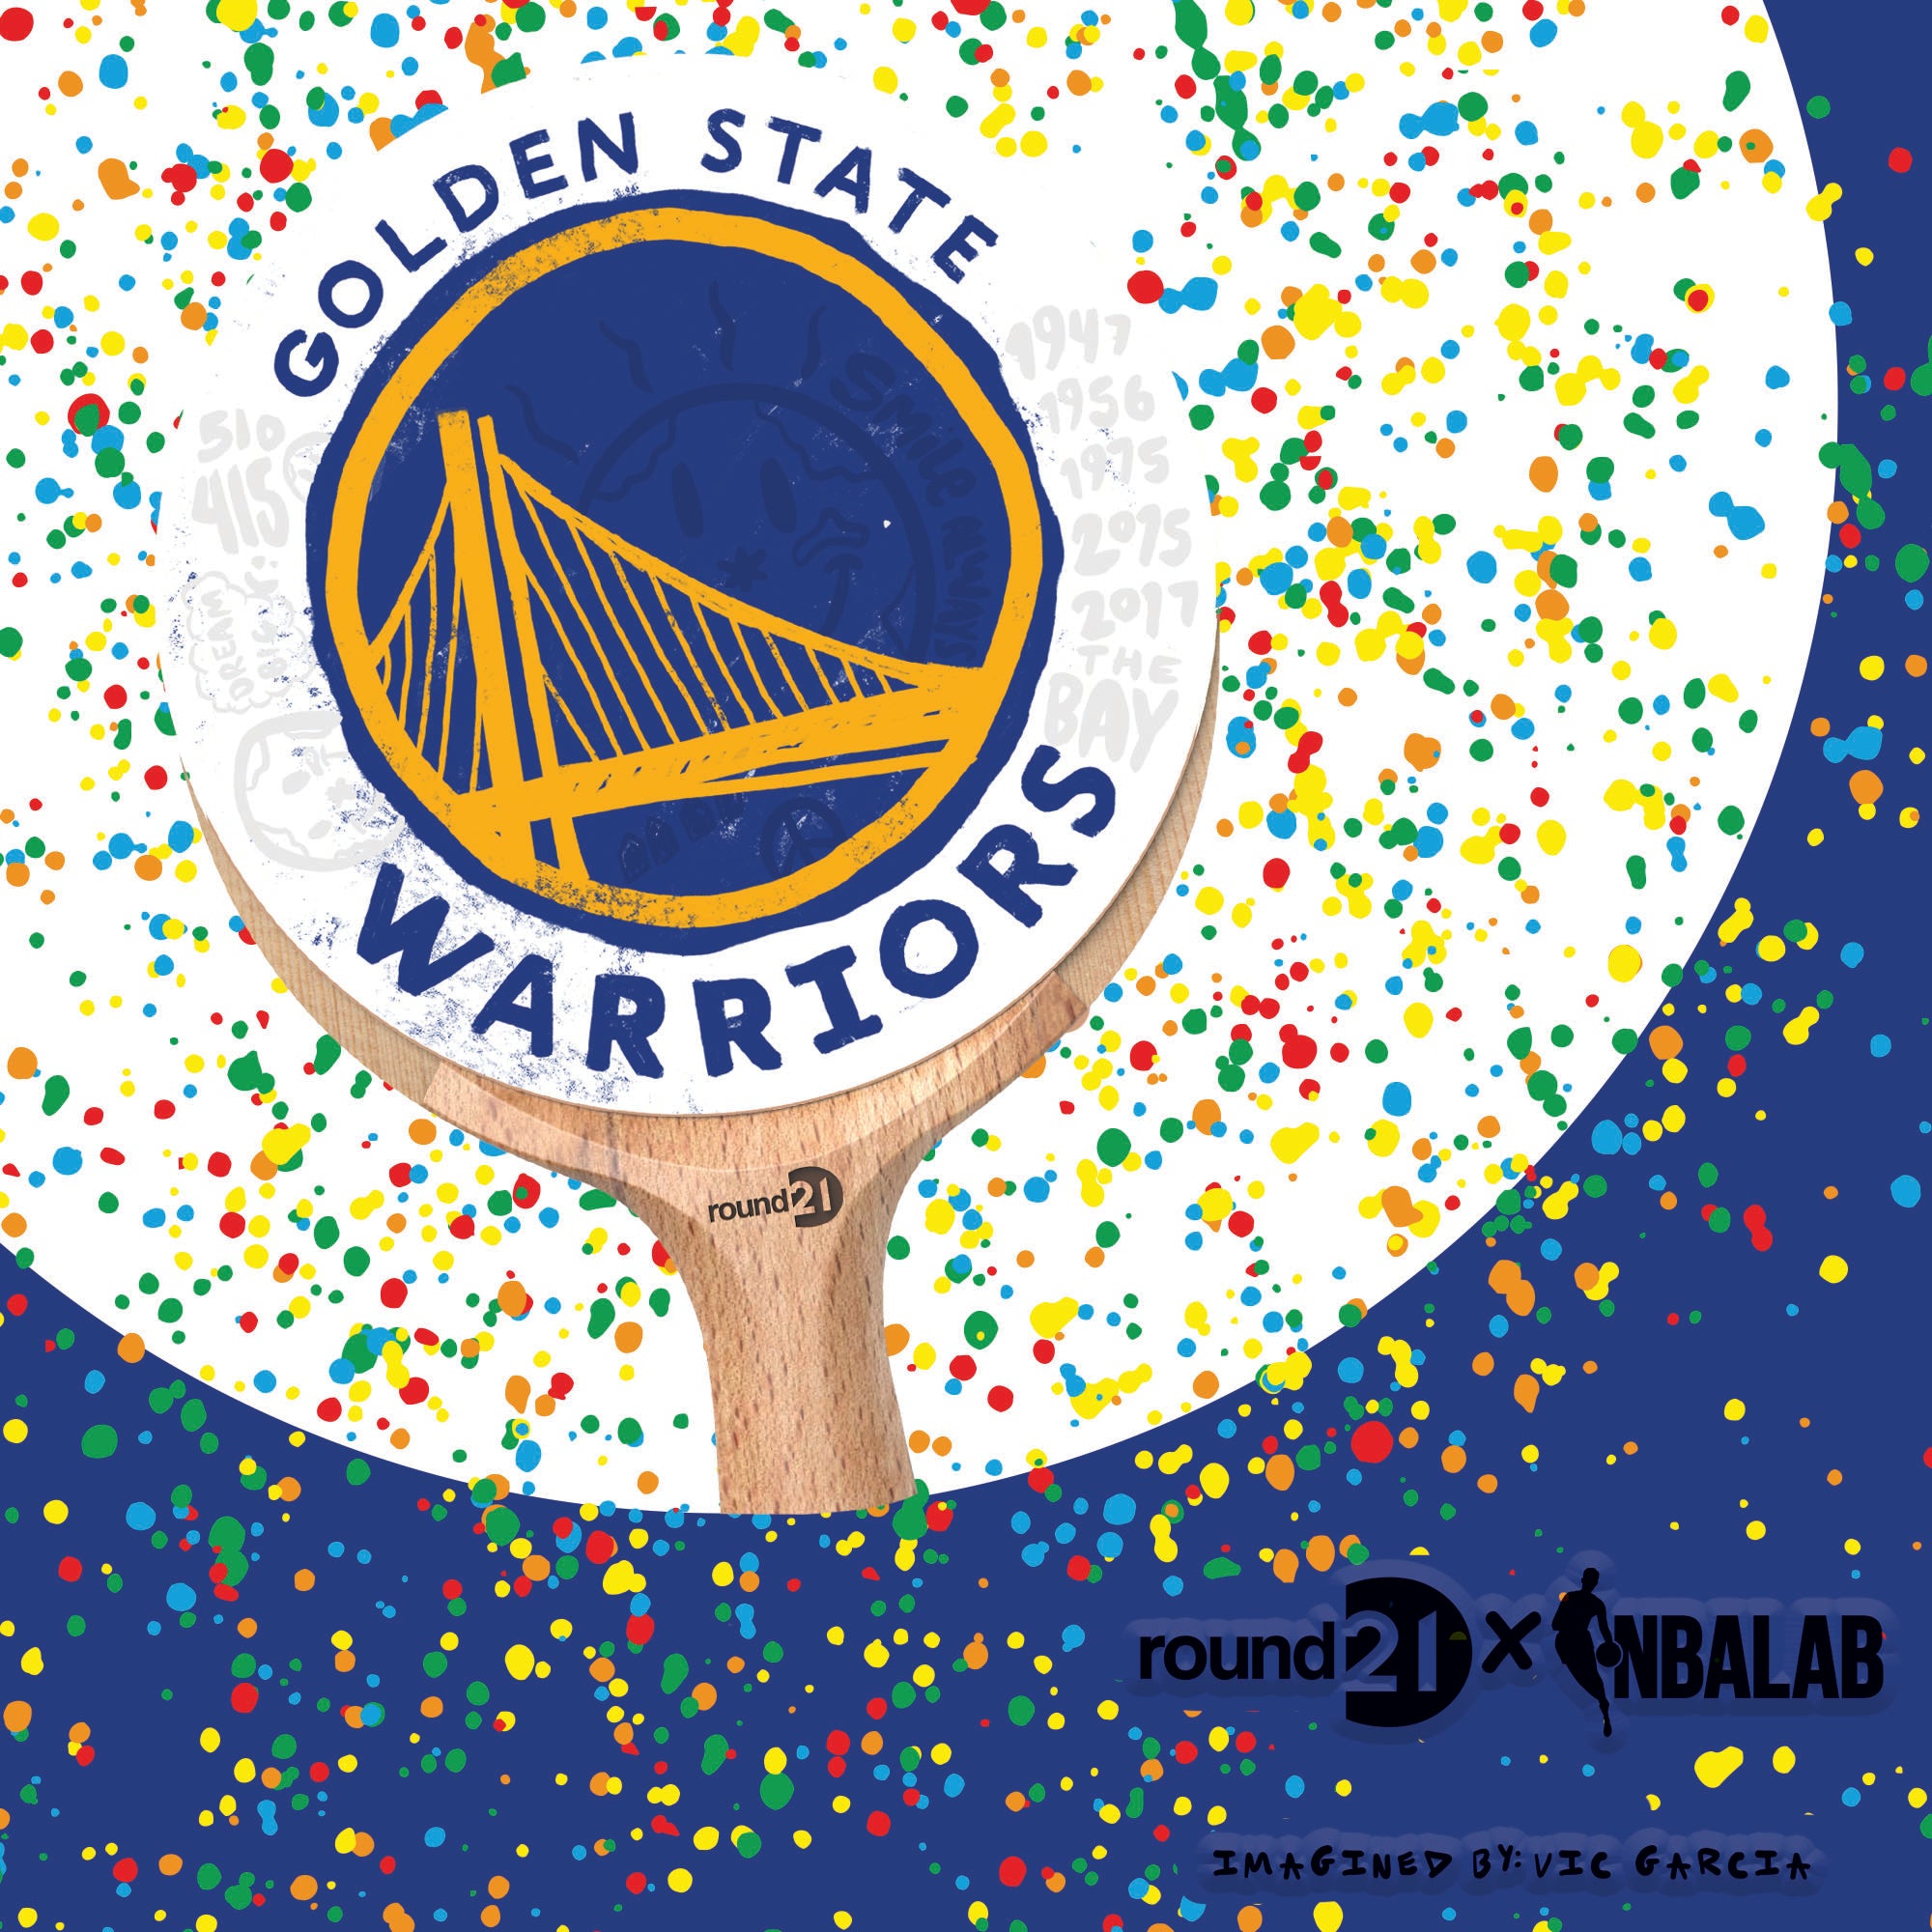 Golden State Warriors paddle